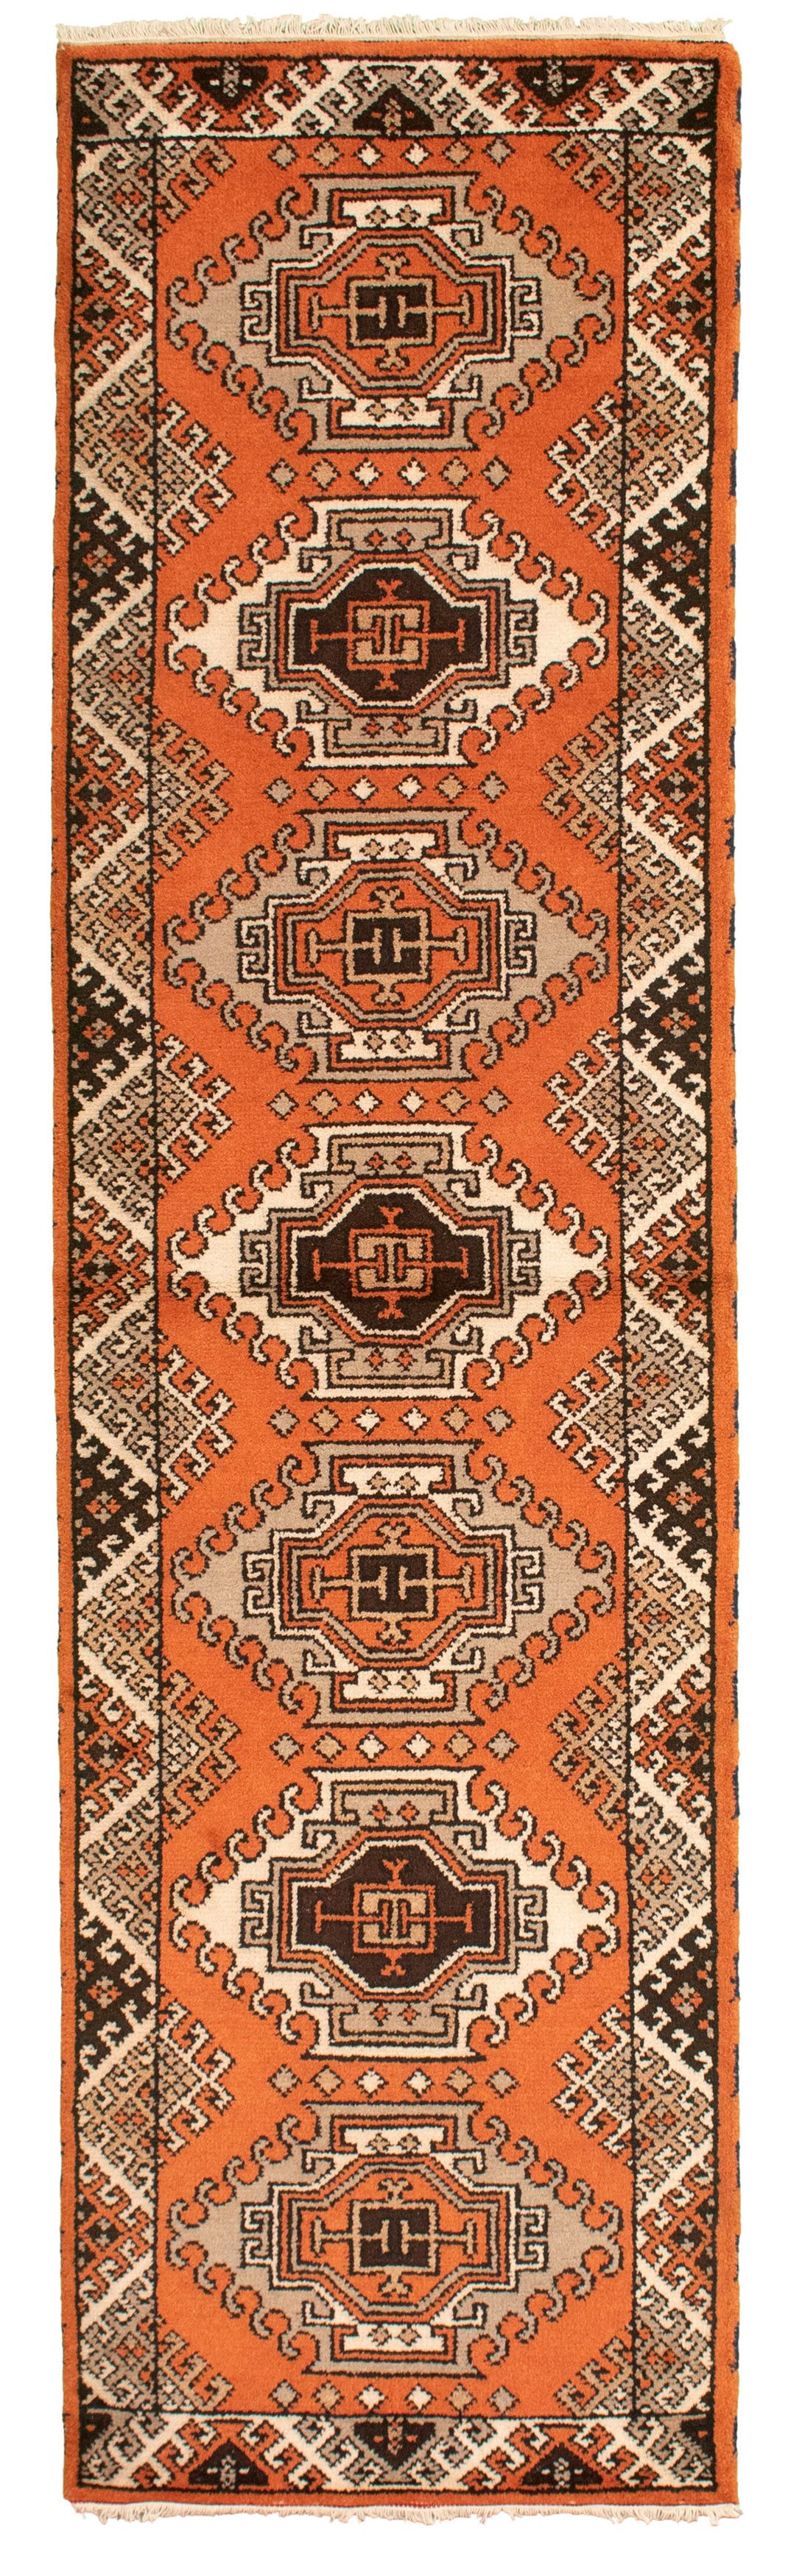 Hand-knotted Royal Kazak Copper Wool Rug 2'8" x 9'11" Size: 2'8" x 9'11"  